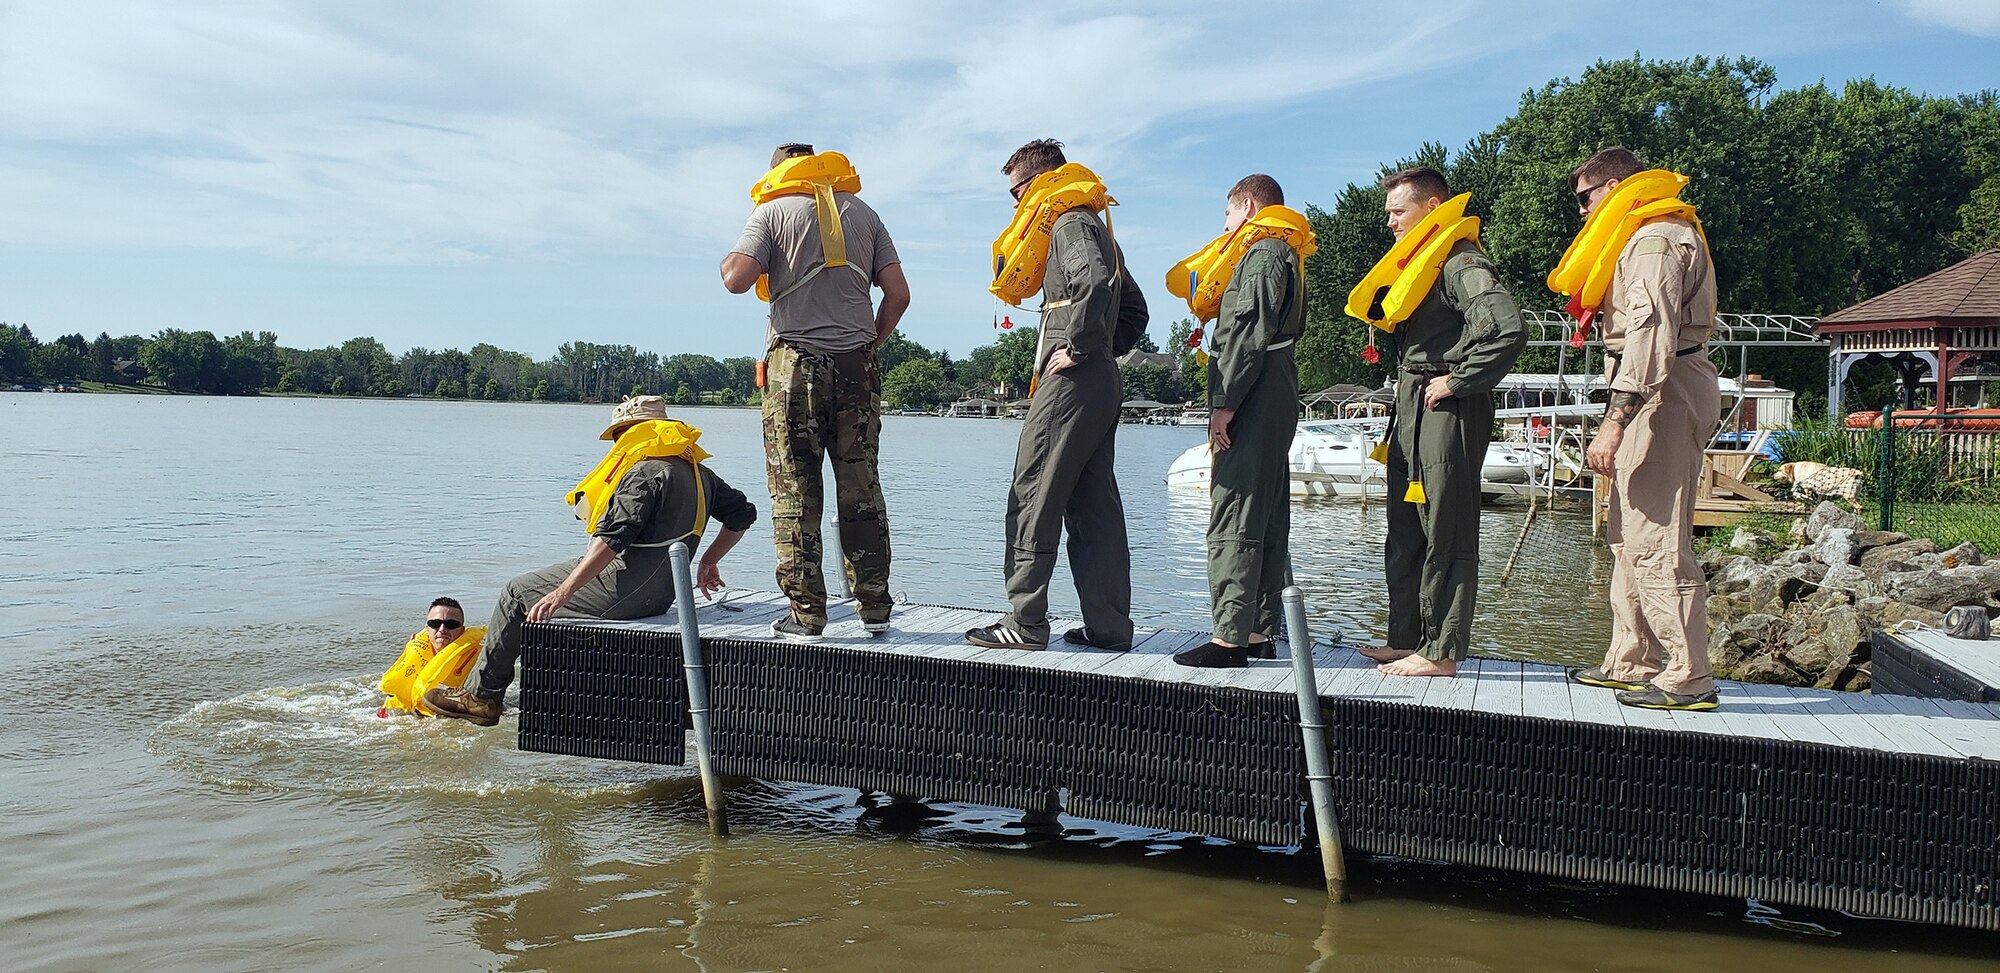 Reserve Citizen Airmen practice coordinated swimming techniques to stay warm and afloat during Survival, Evasion, Resistance and Escape training at Choctaw Lake in London, Ohio July 14, 2019